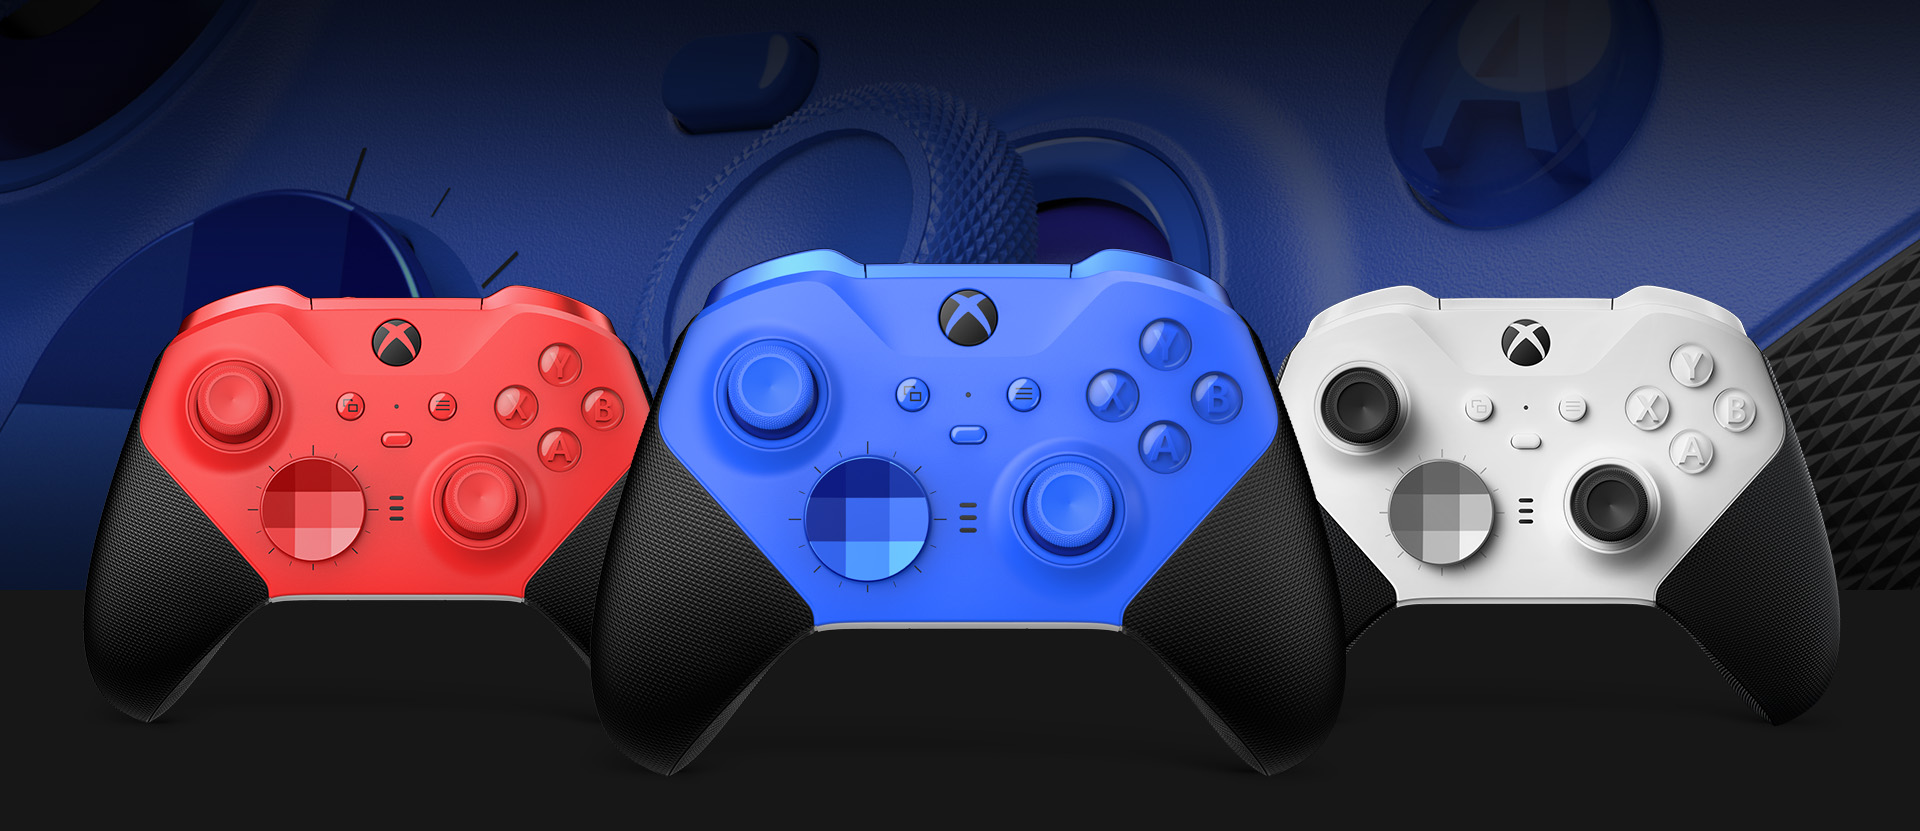 Front view of the Xbox Elite Wireless Controller Series 2 – Core (Blue) with other color options shown alongside. A close up of the controller thumbsticks and textured grip is in the background.